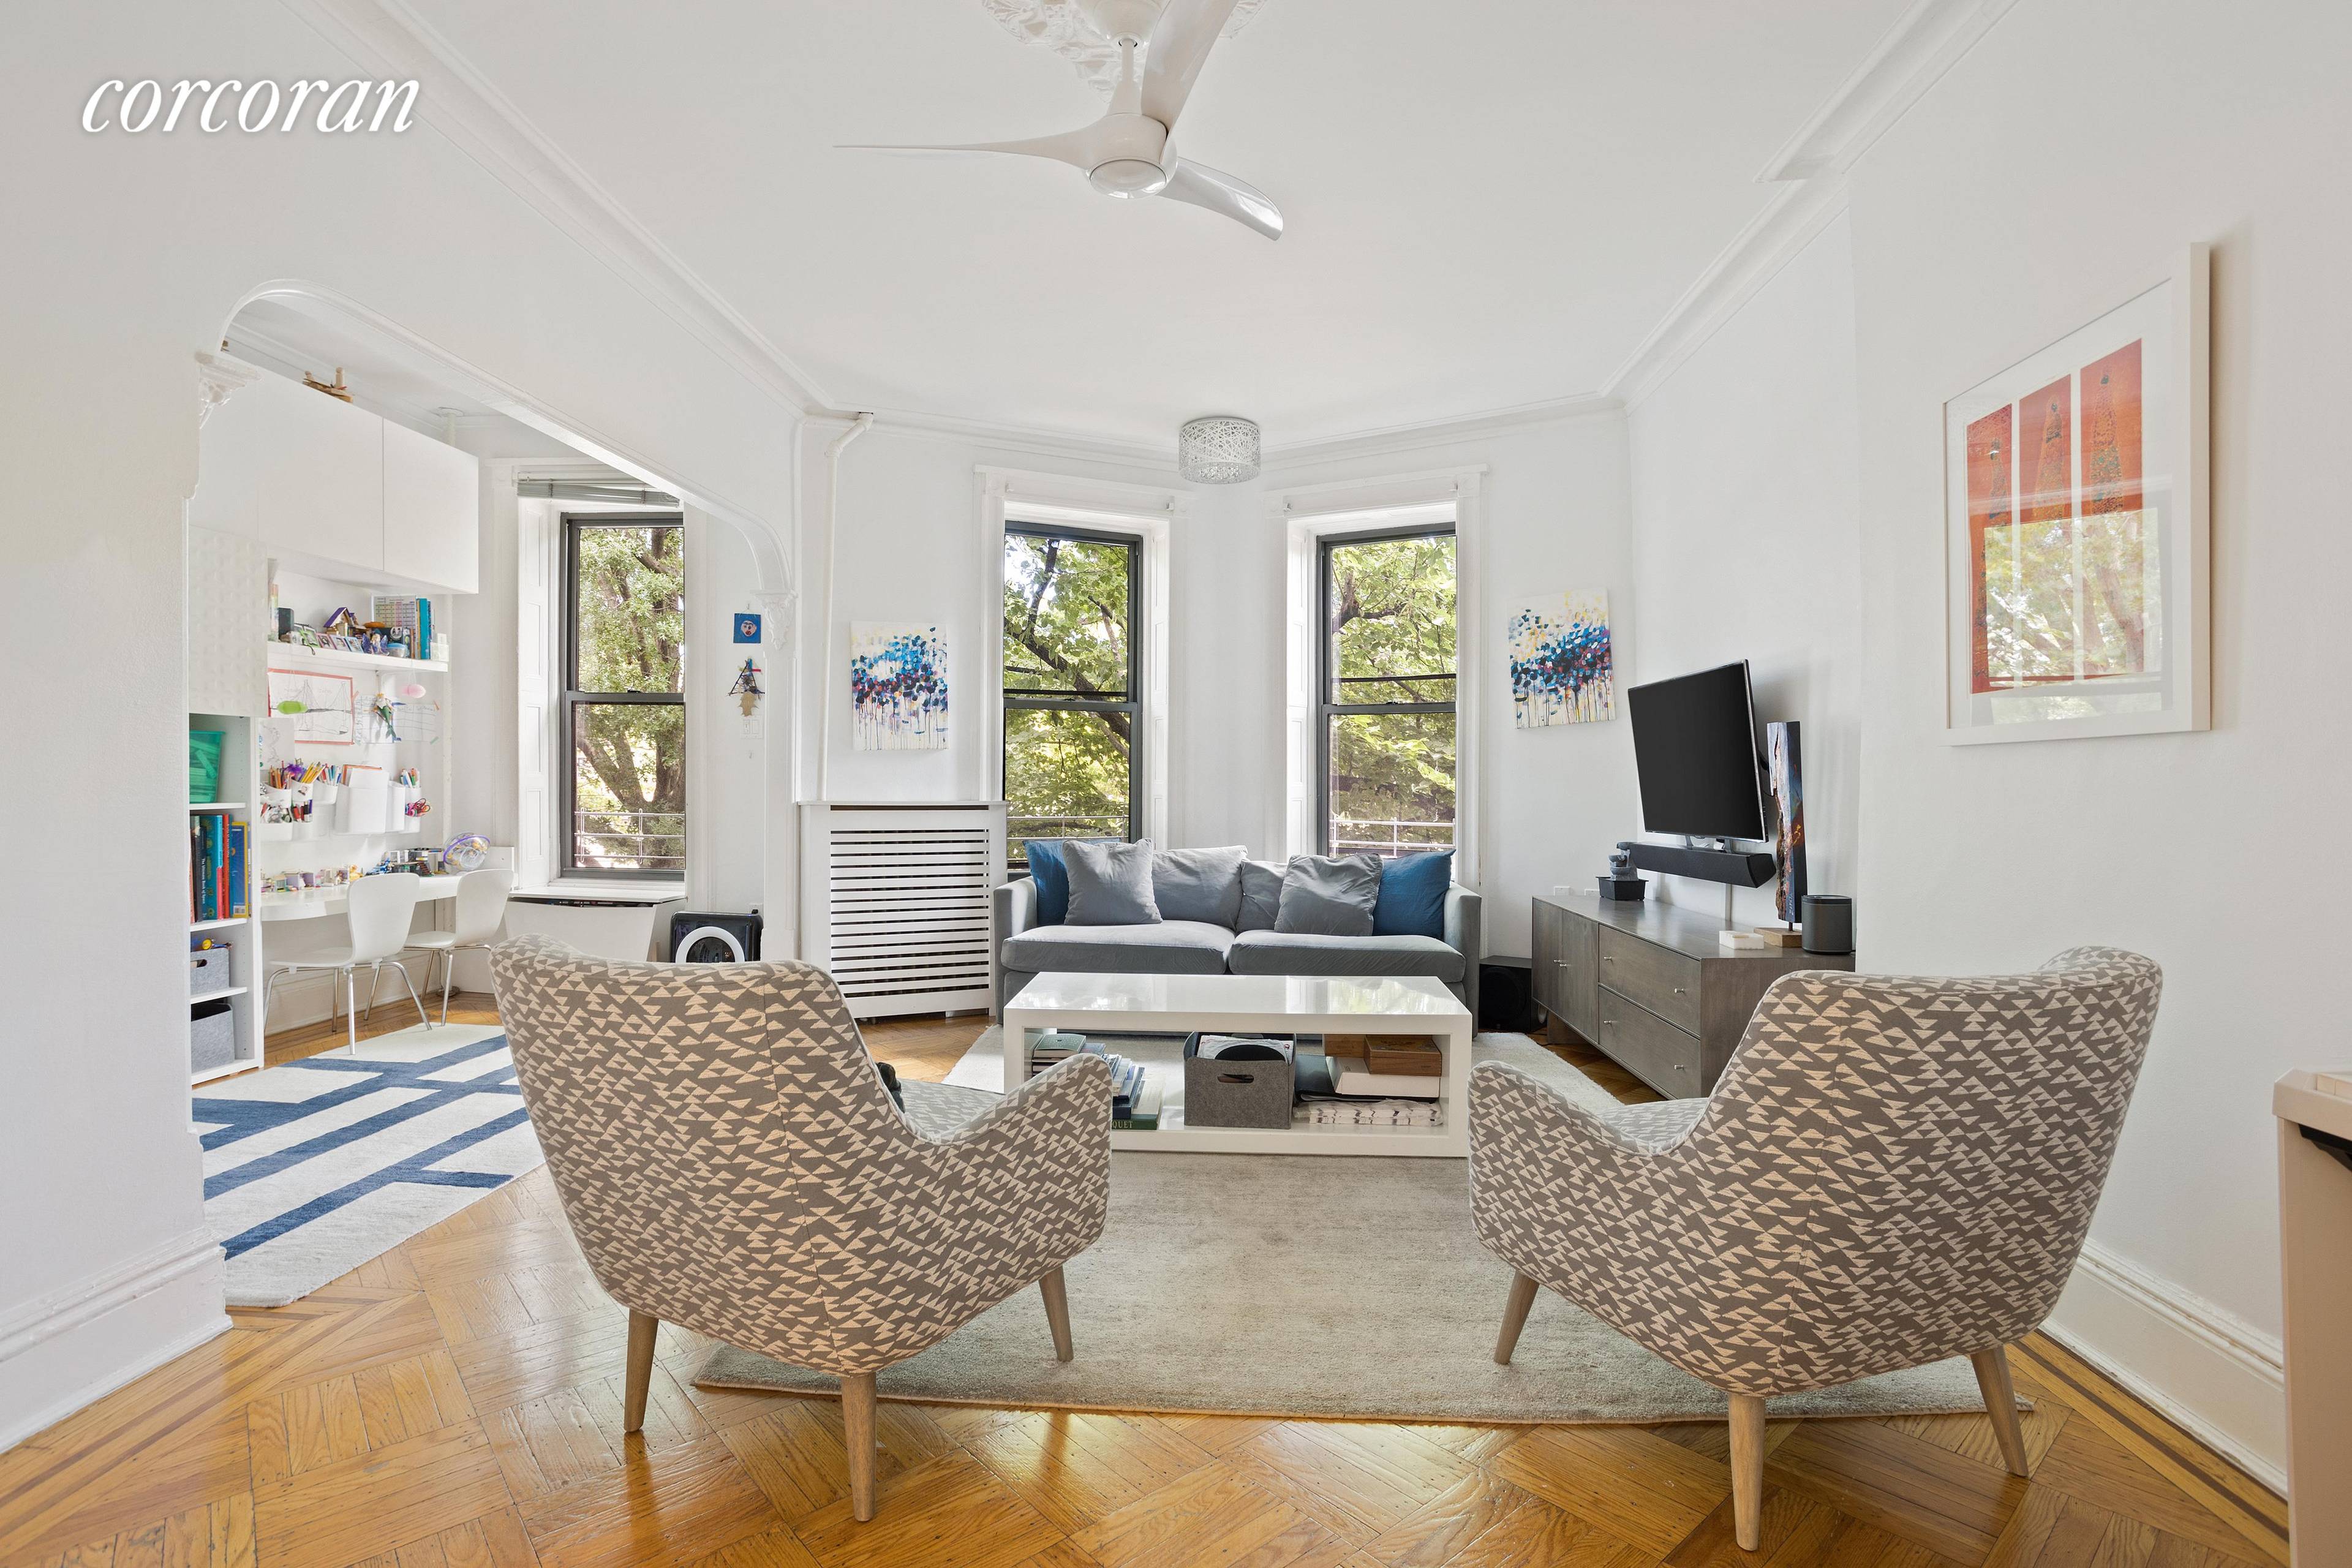 Centrally located in the heart of Park Slope, this upper three bedroom duplex immediately feels like home.